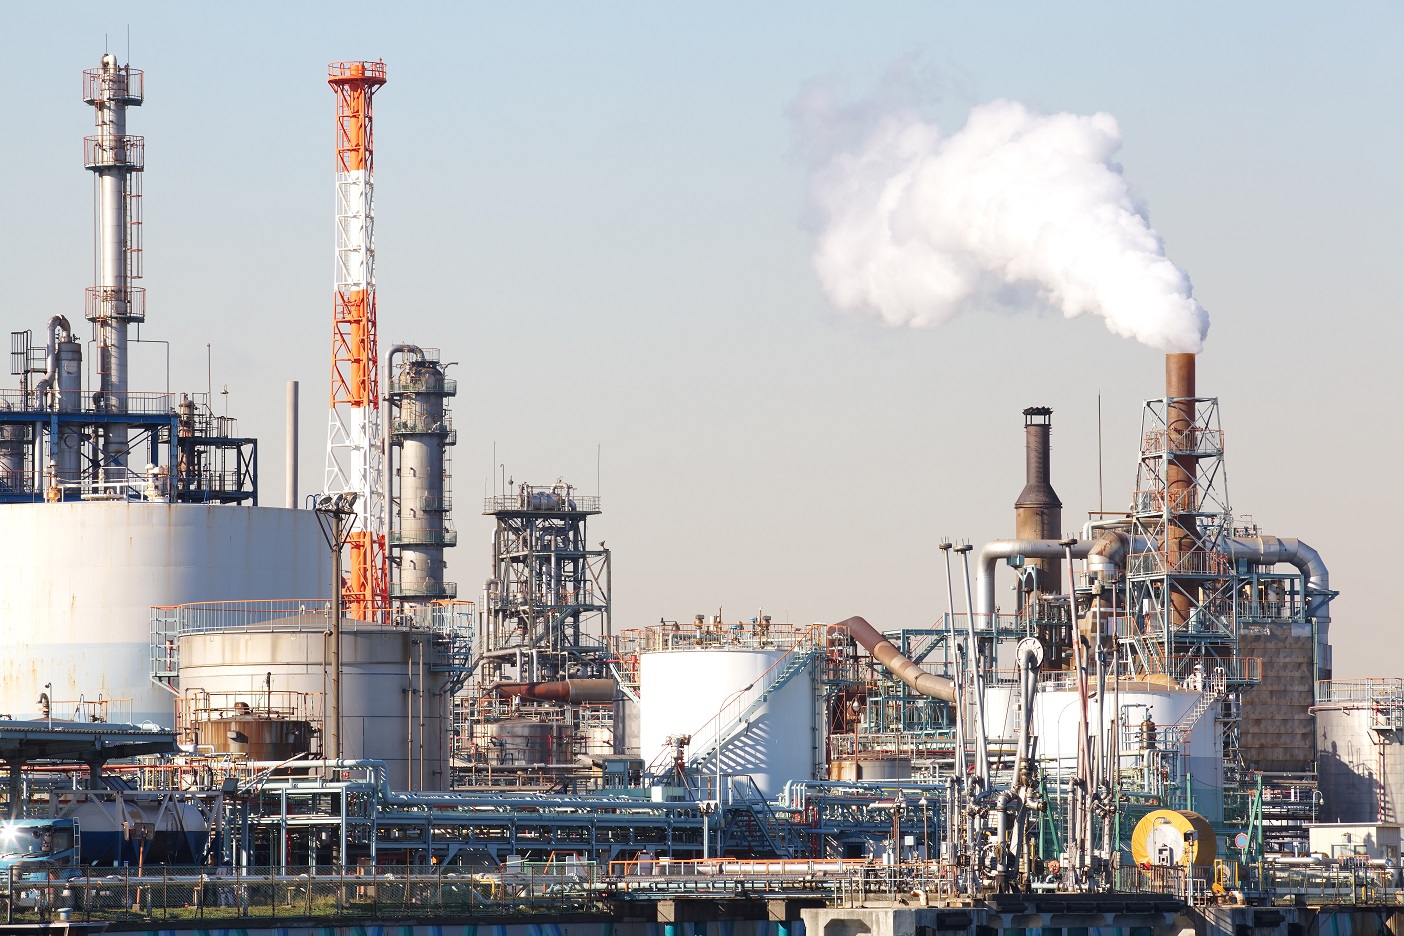 Fire Protection Systems Used in Oil and Gas Process Facilities